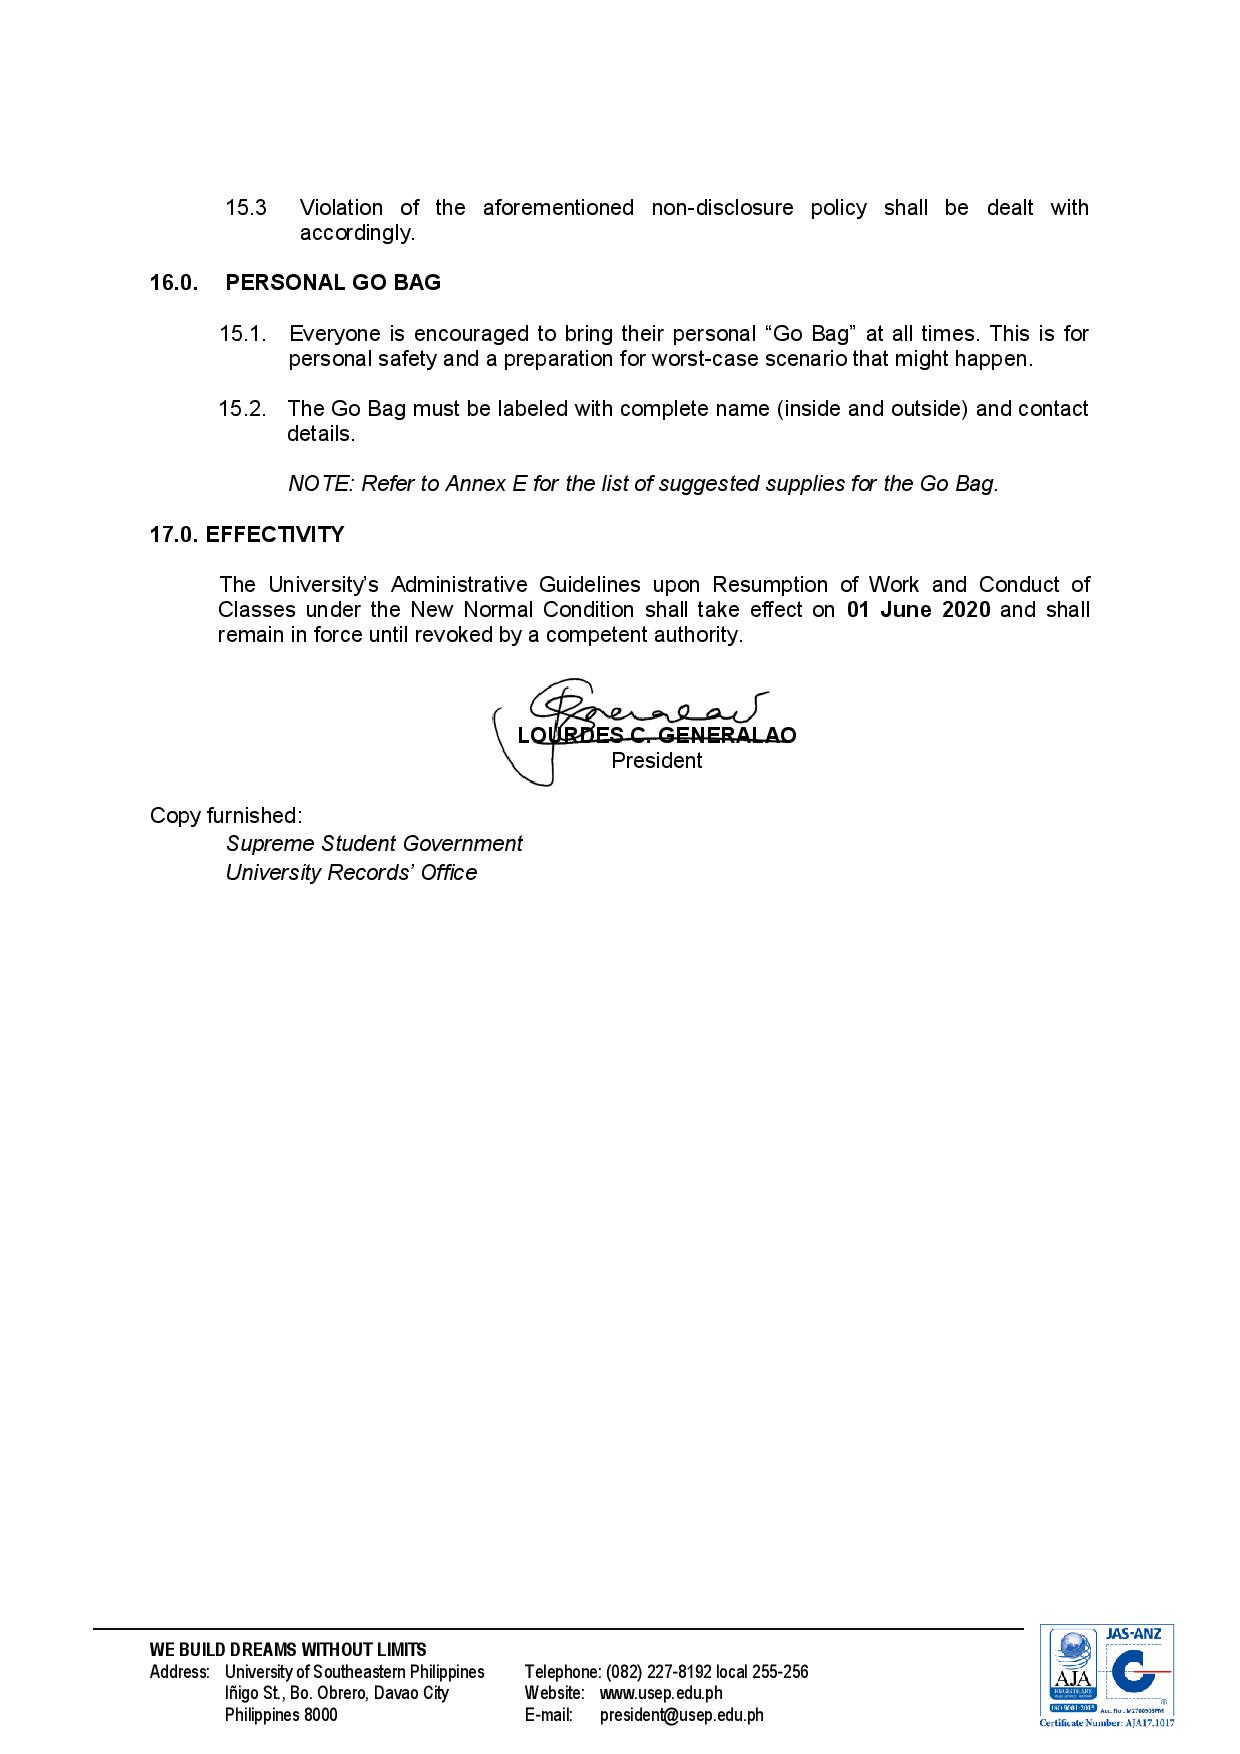 mc-03-s-2020-memorandum-circular-on-administrative-guidelines-upon-resumption-of-work-and-conduct-of-classes-under-the-new-normal-condition-1-page-014